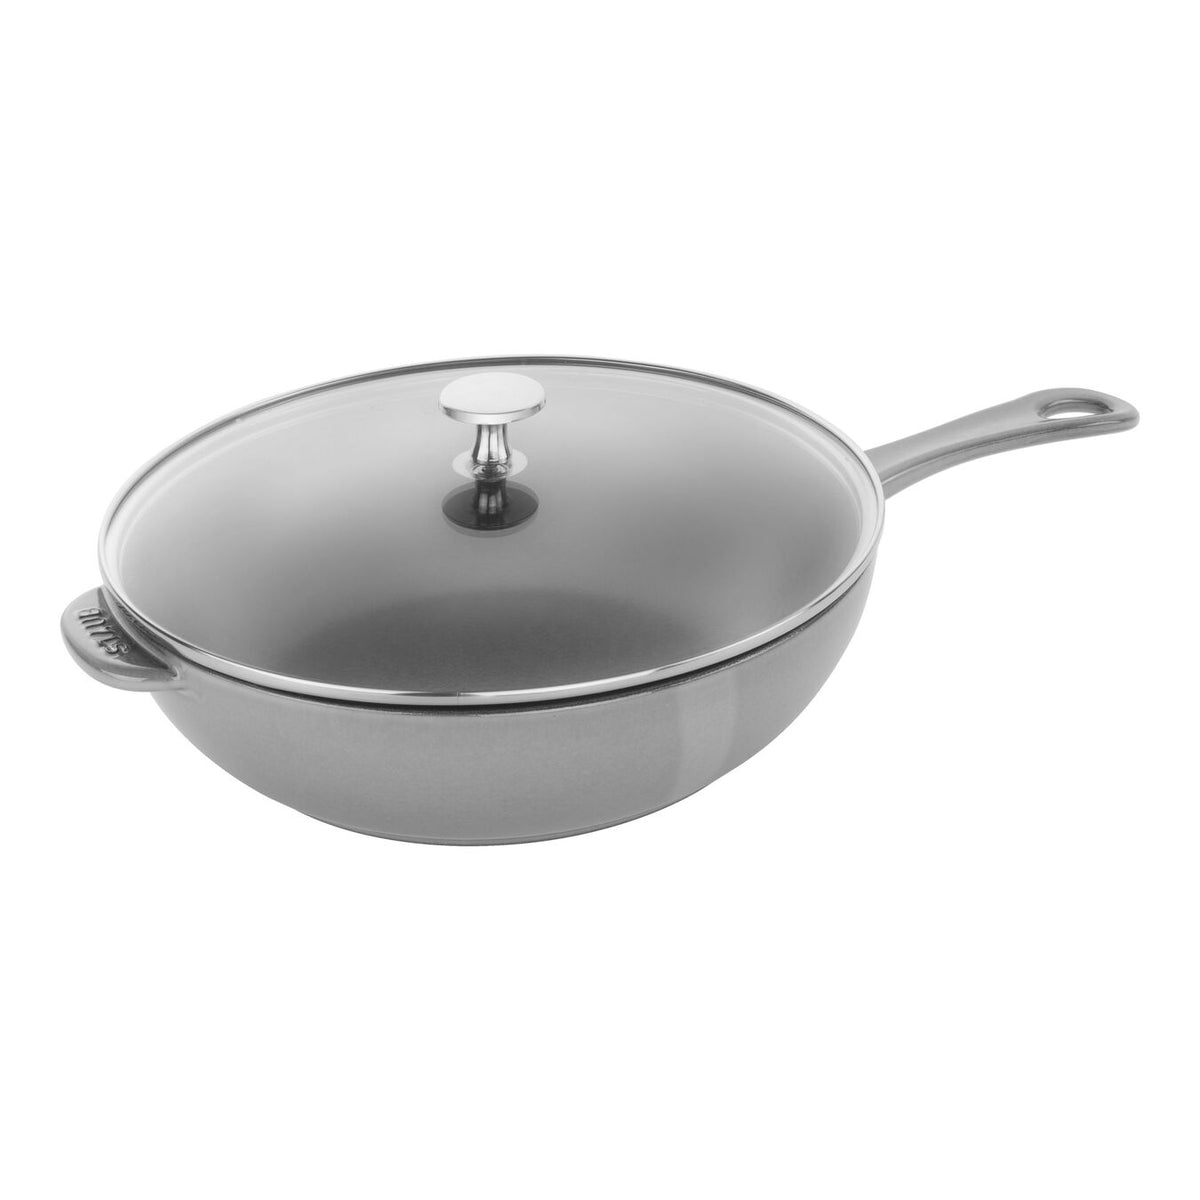 Graphite Grey Cast Iron Daily Pan with Glass Lid - 26cm